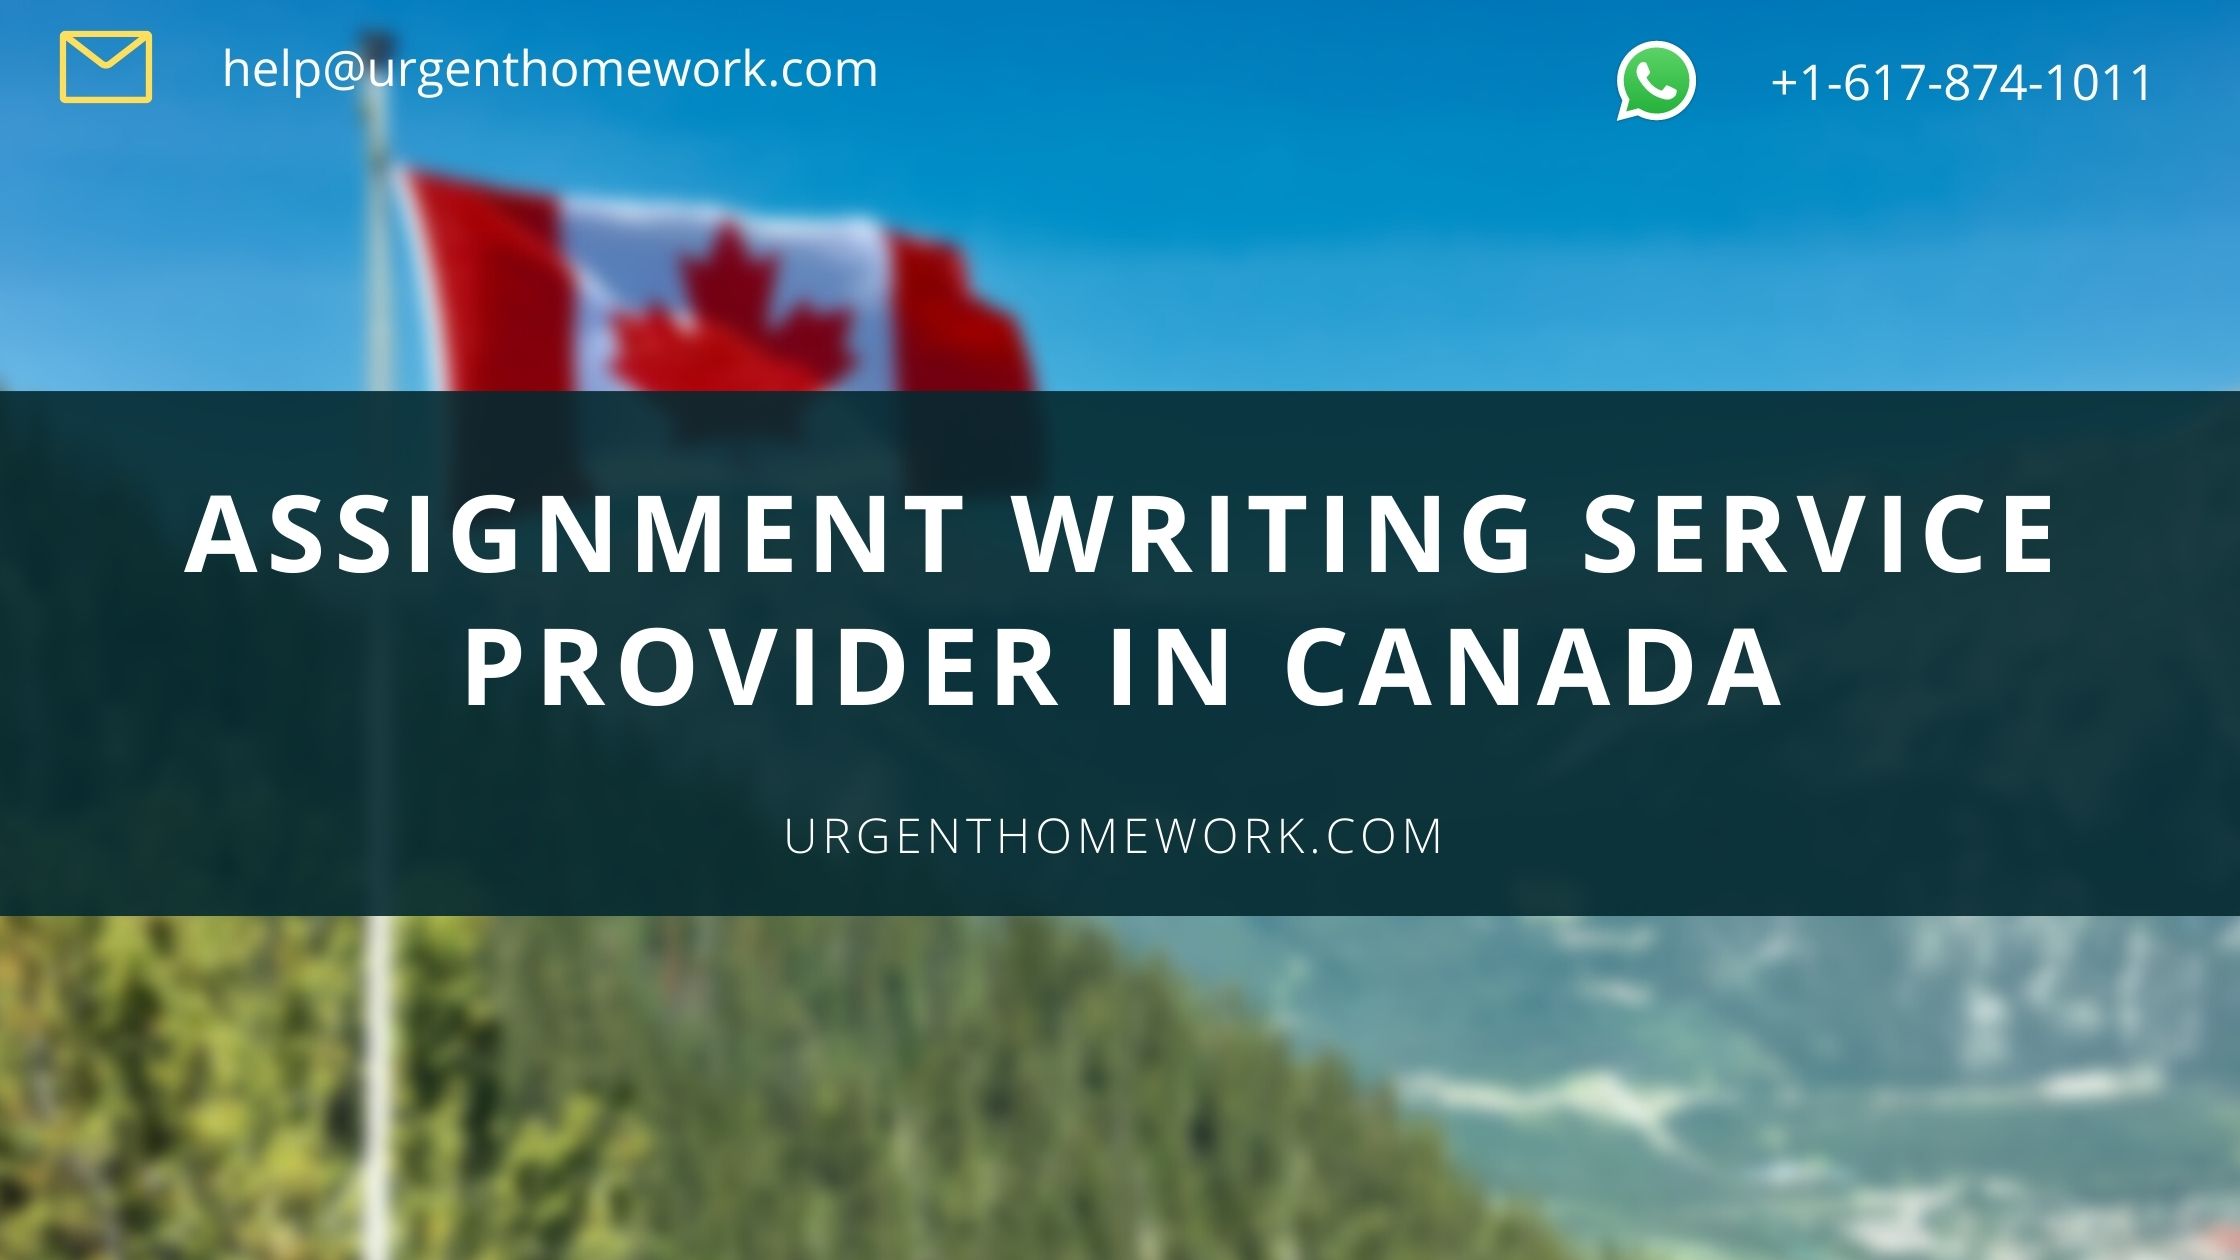 Assignment Writing Service Provider in Canada